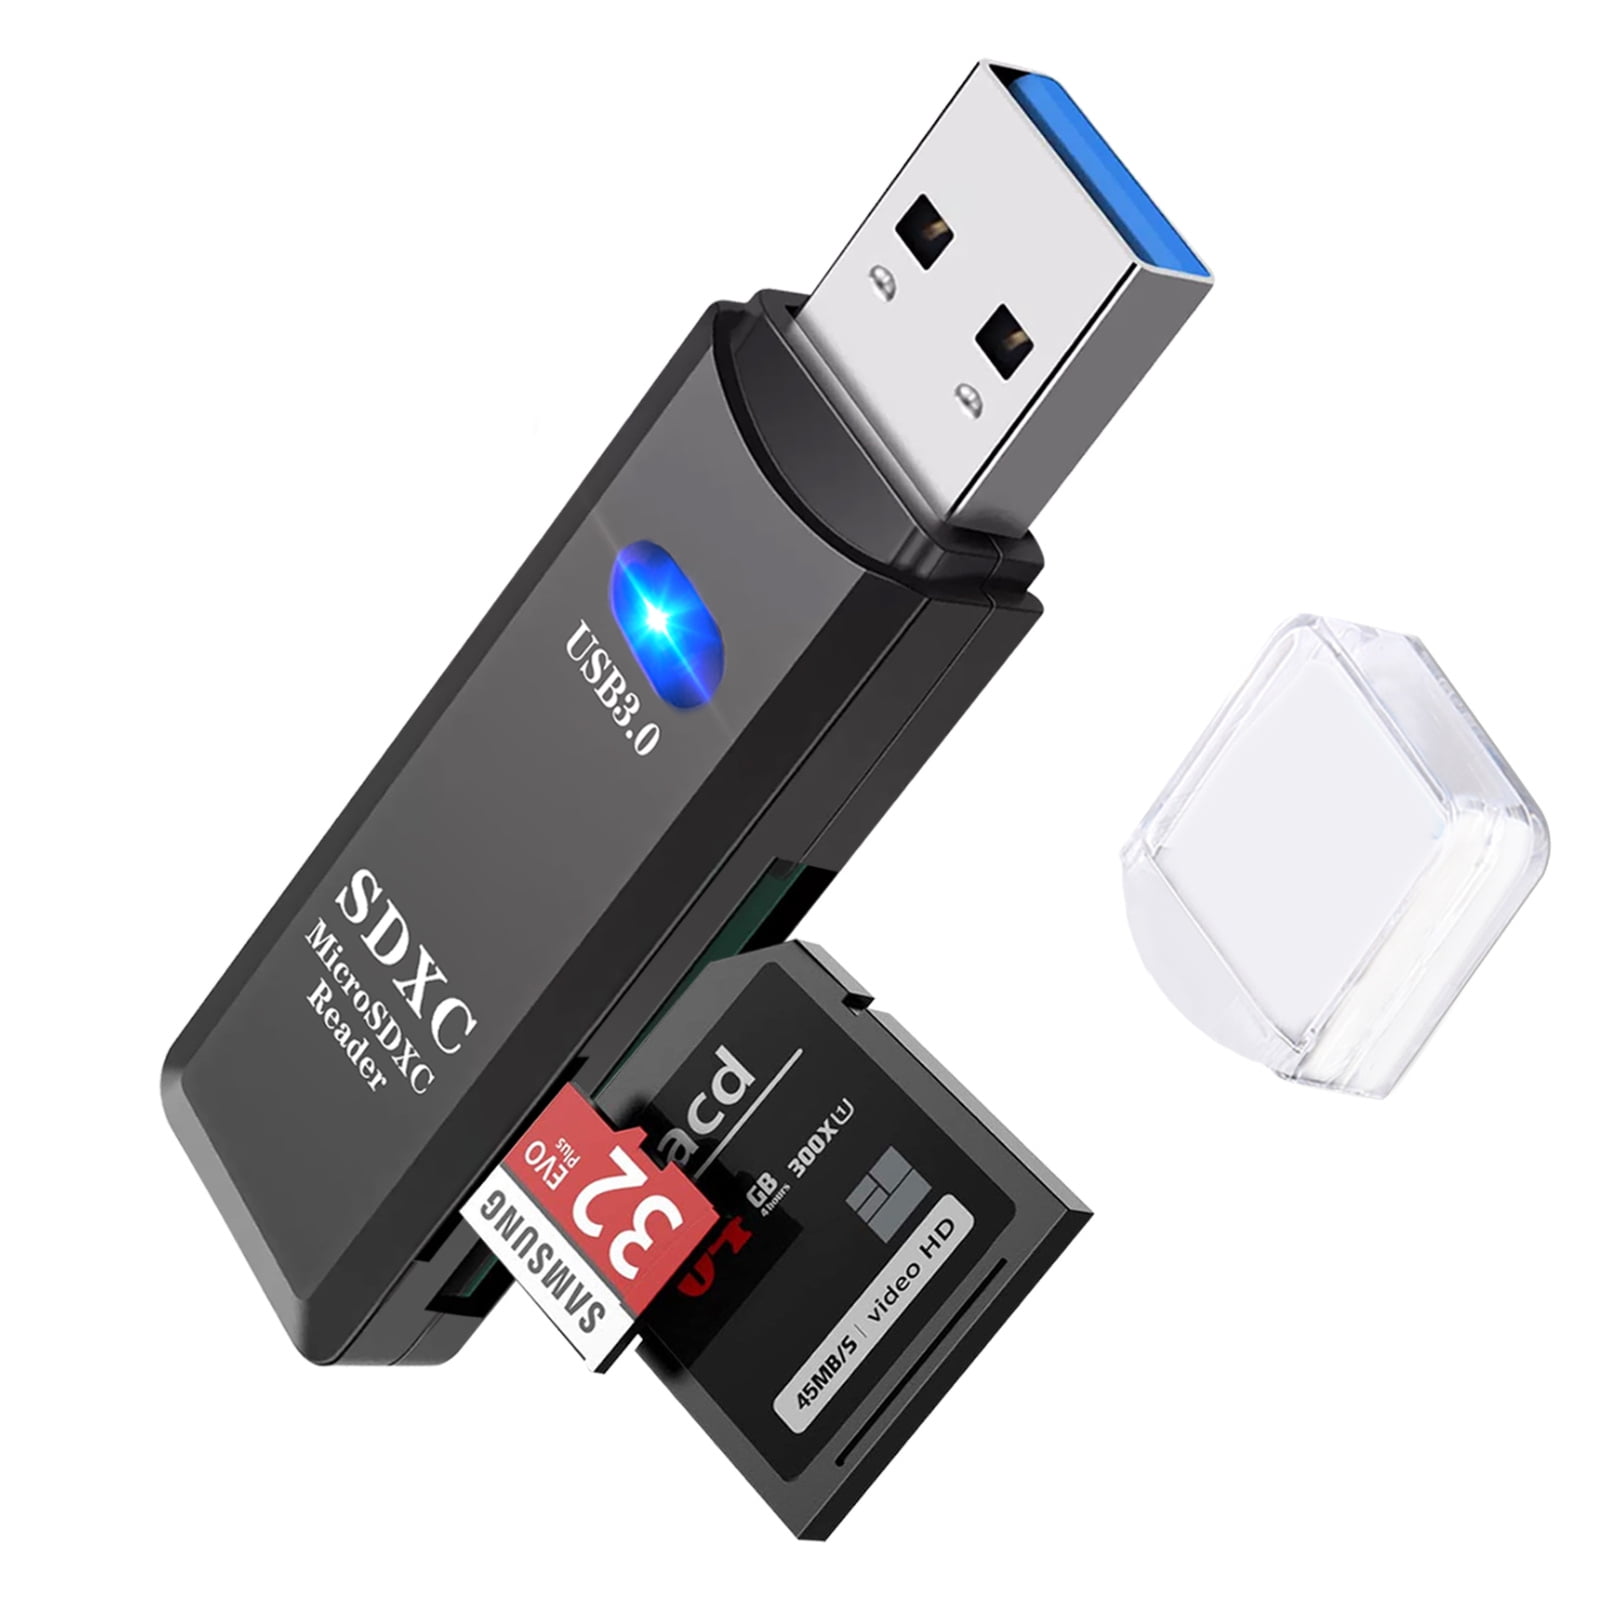 Pro High Speed 4 in 1 USB Memory Card Reader For MS MS-PRO TF Micro SD Useful 